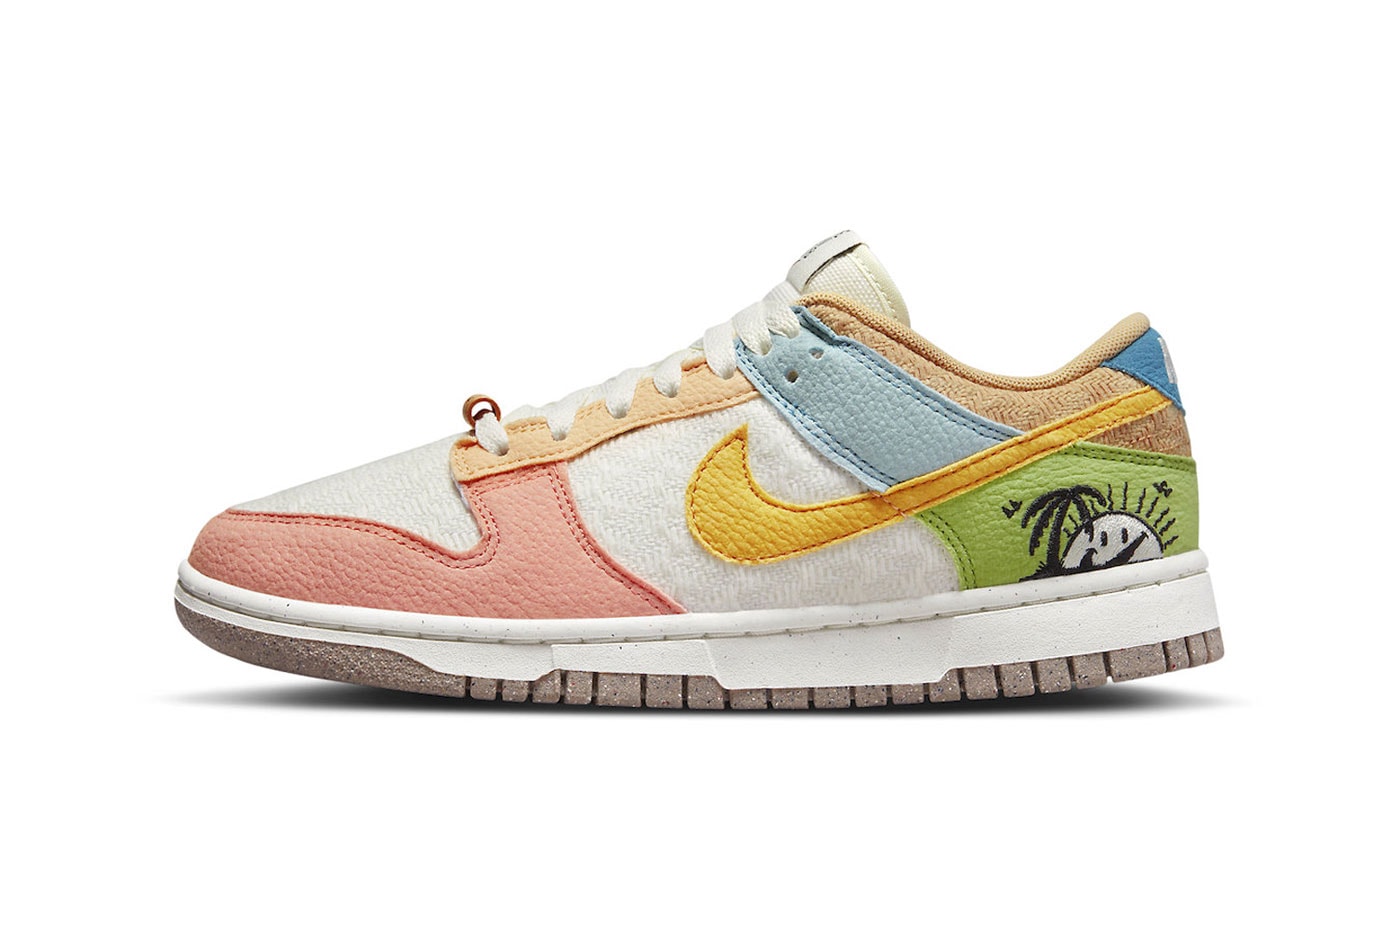 Nike Dunk Low sun club pack Sail sanded gold light madder root recycled leather palm trees have a nike day grind sole 110 usd release info price dq0265-100